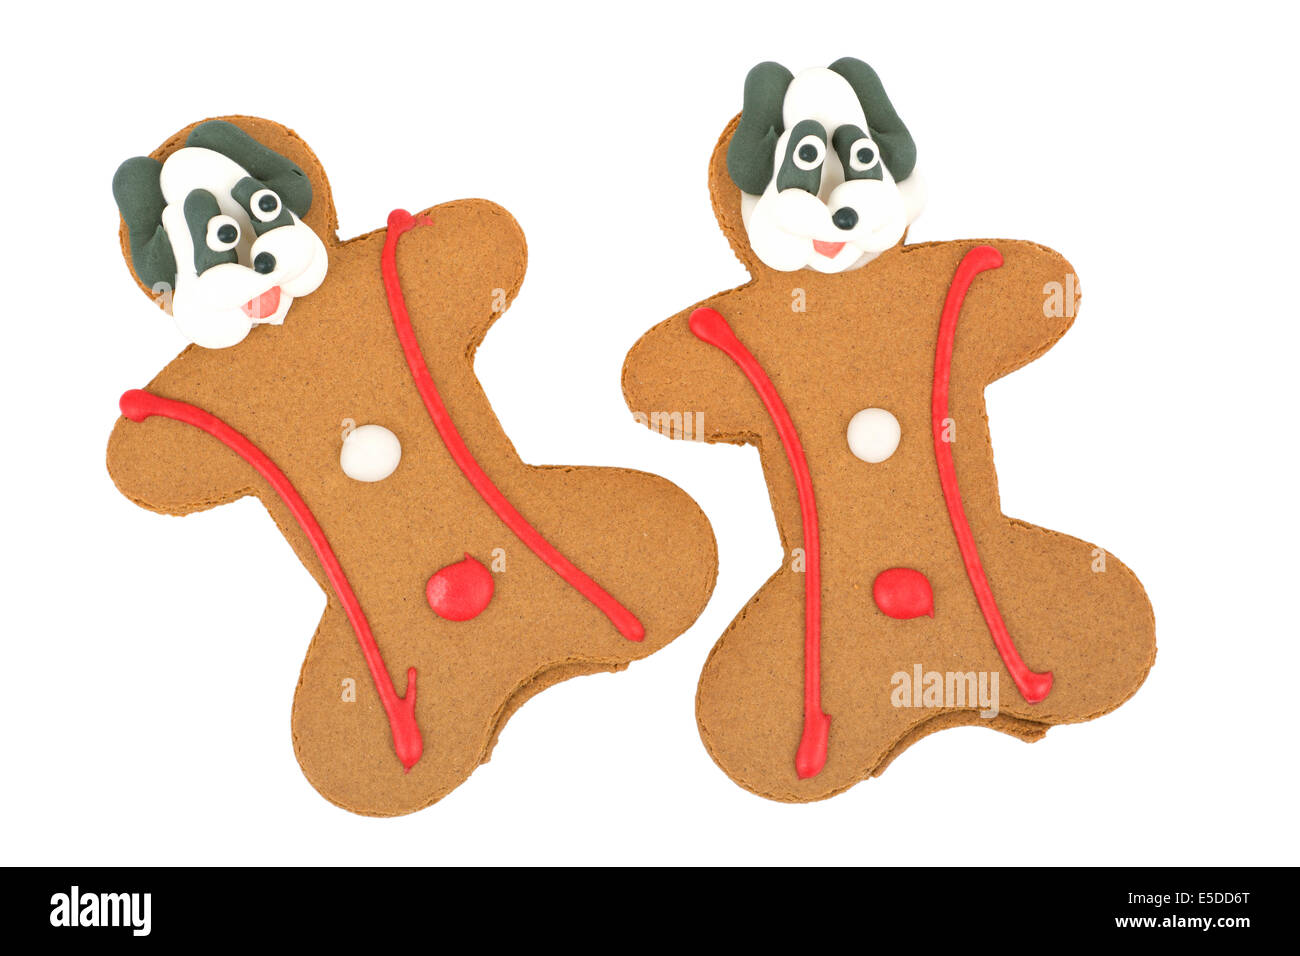 Gingerbread Cookies, gingembre, Biscuits, Cookie Banque D'Images